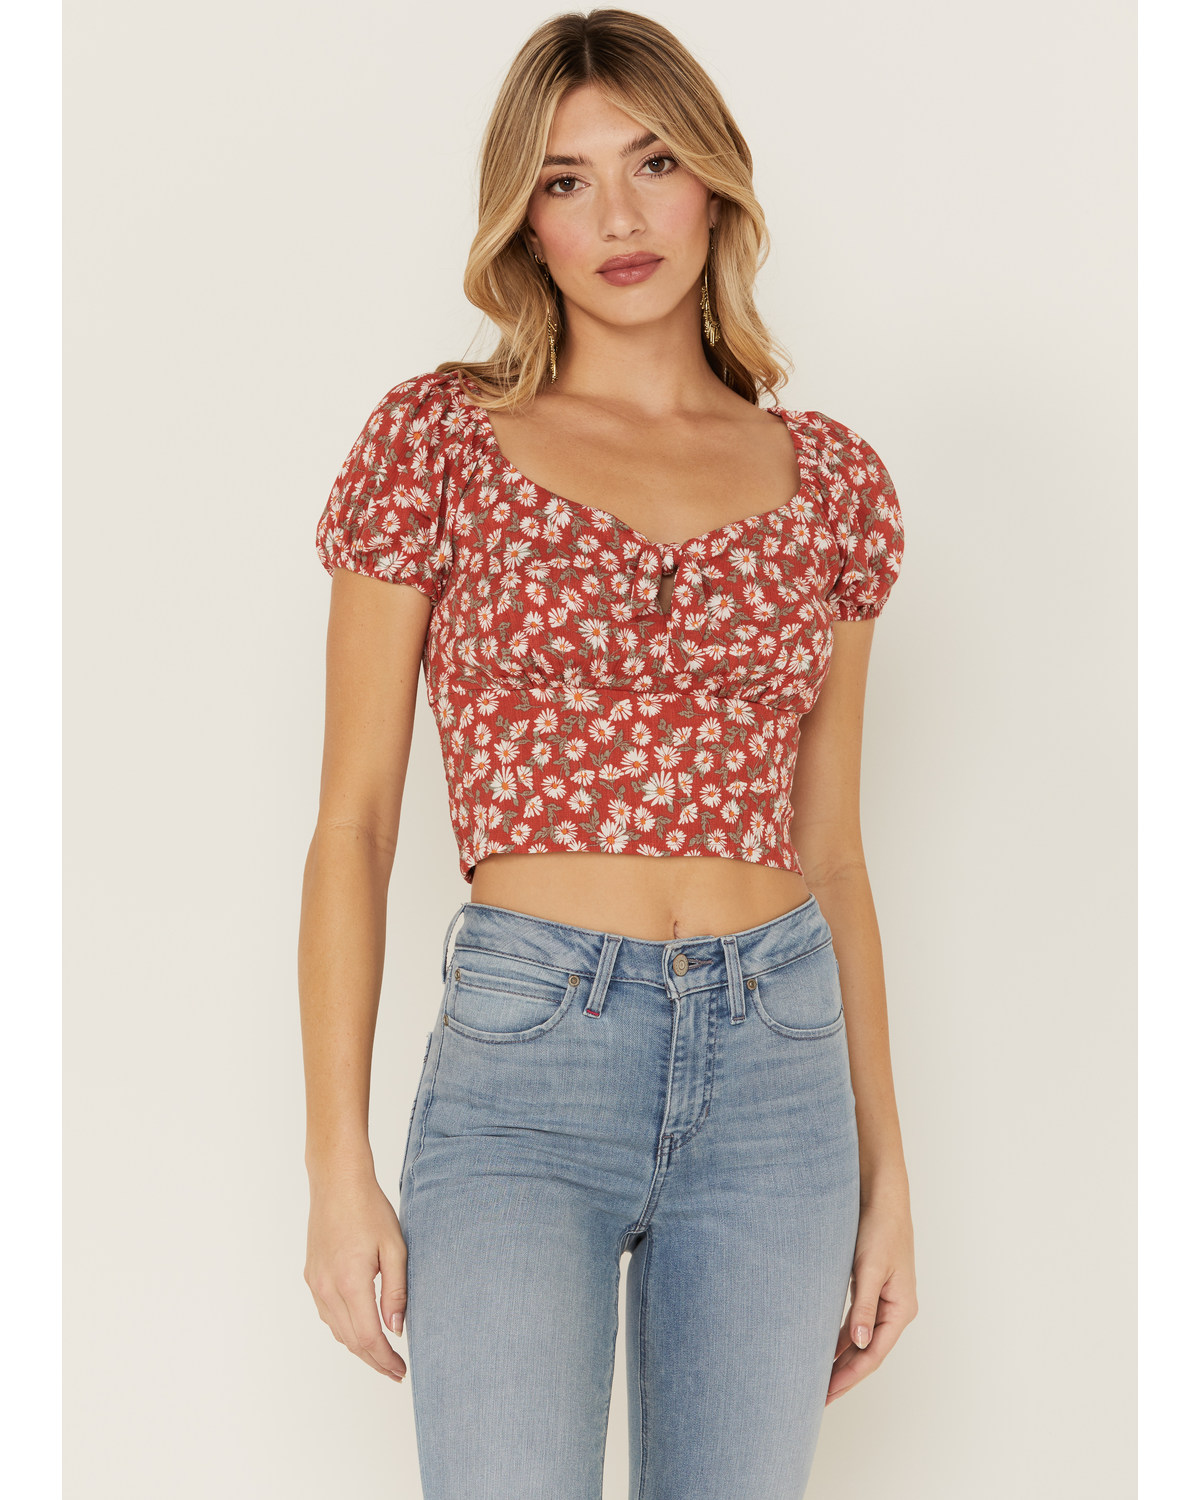 Idyllwind Women's Bay Cove Floral Crop Peasant Top